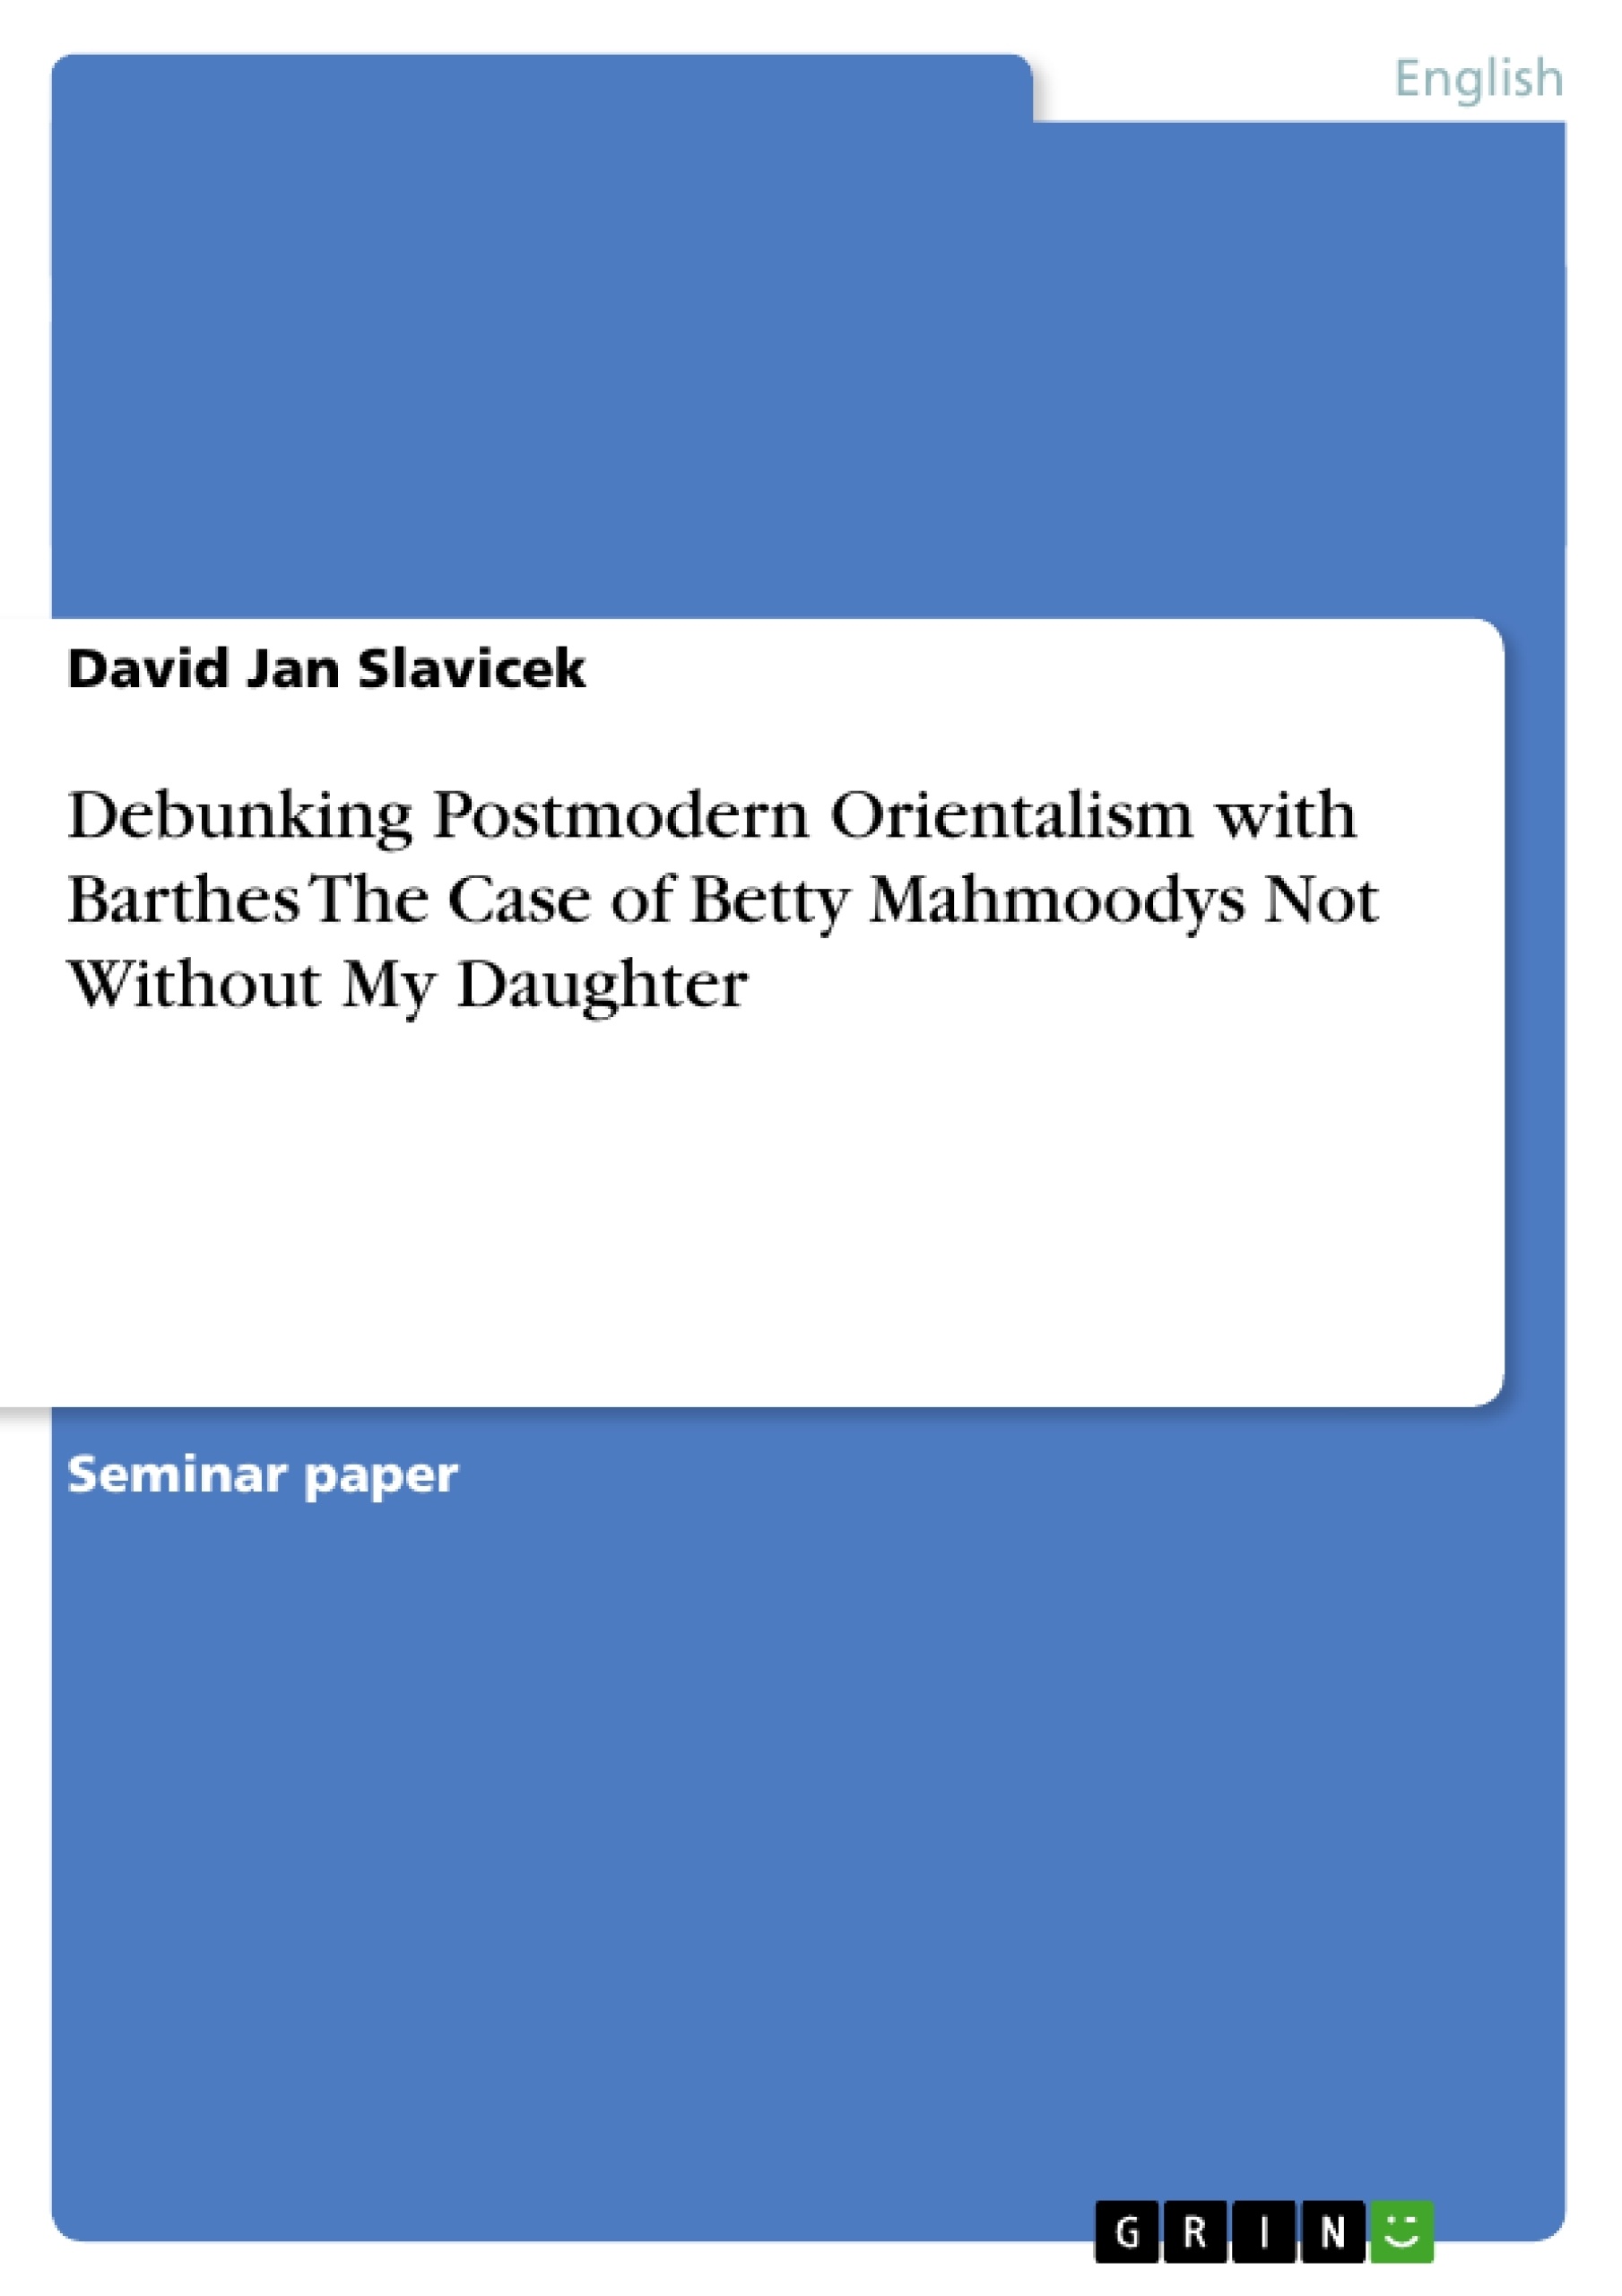 Titre: Debunking Postmodern Orientalism with Barthes The Case of Betty Mahmoodys Not Without My Daughter